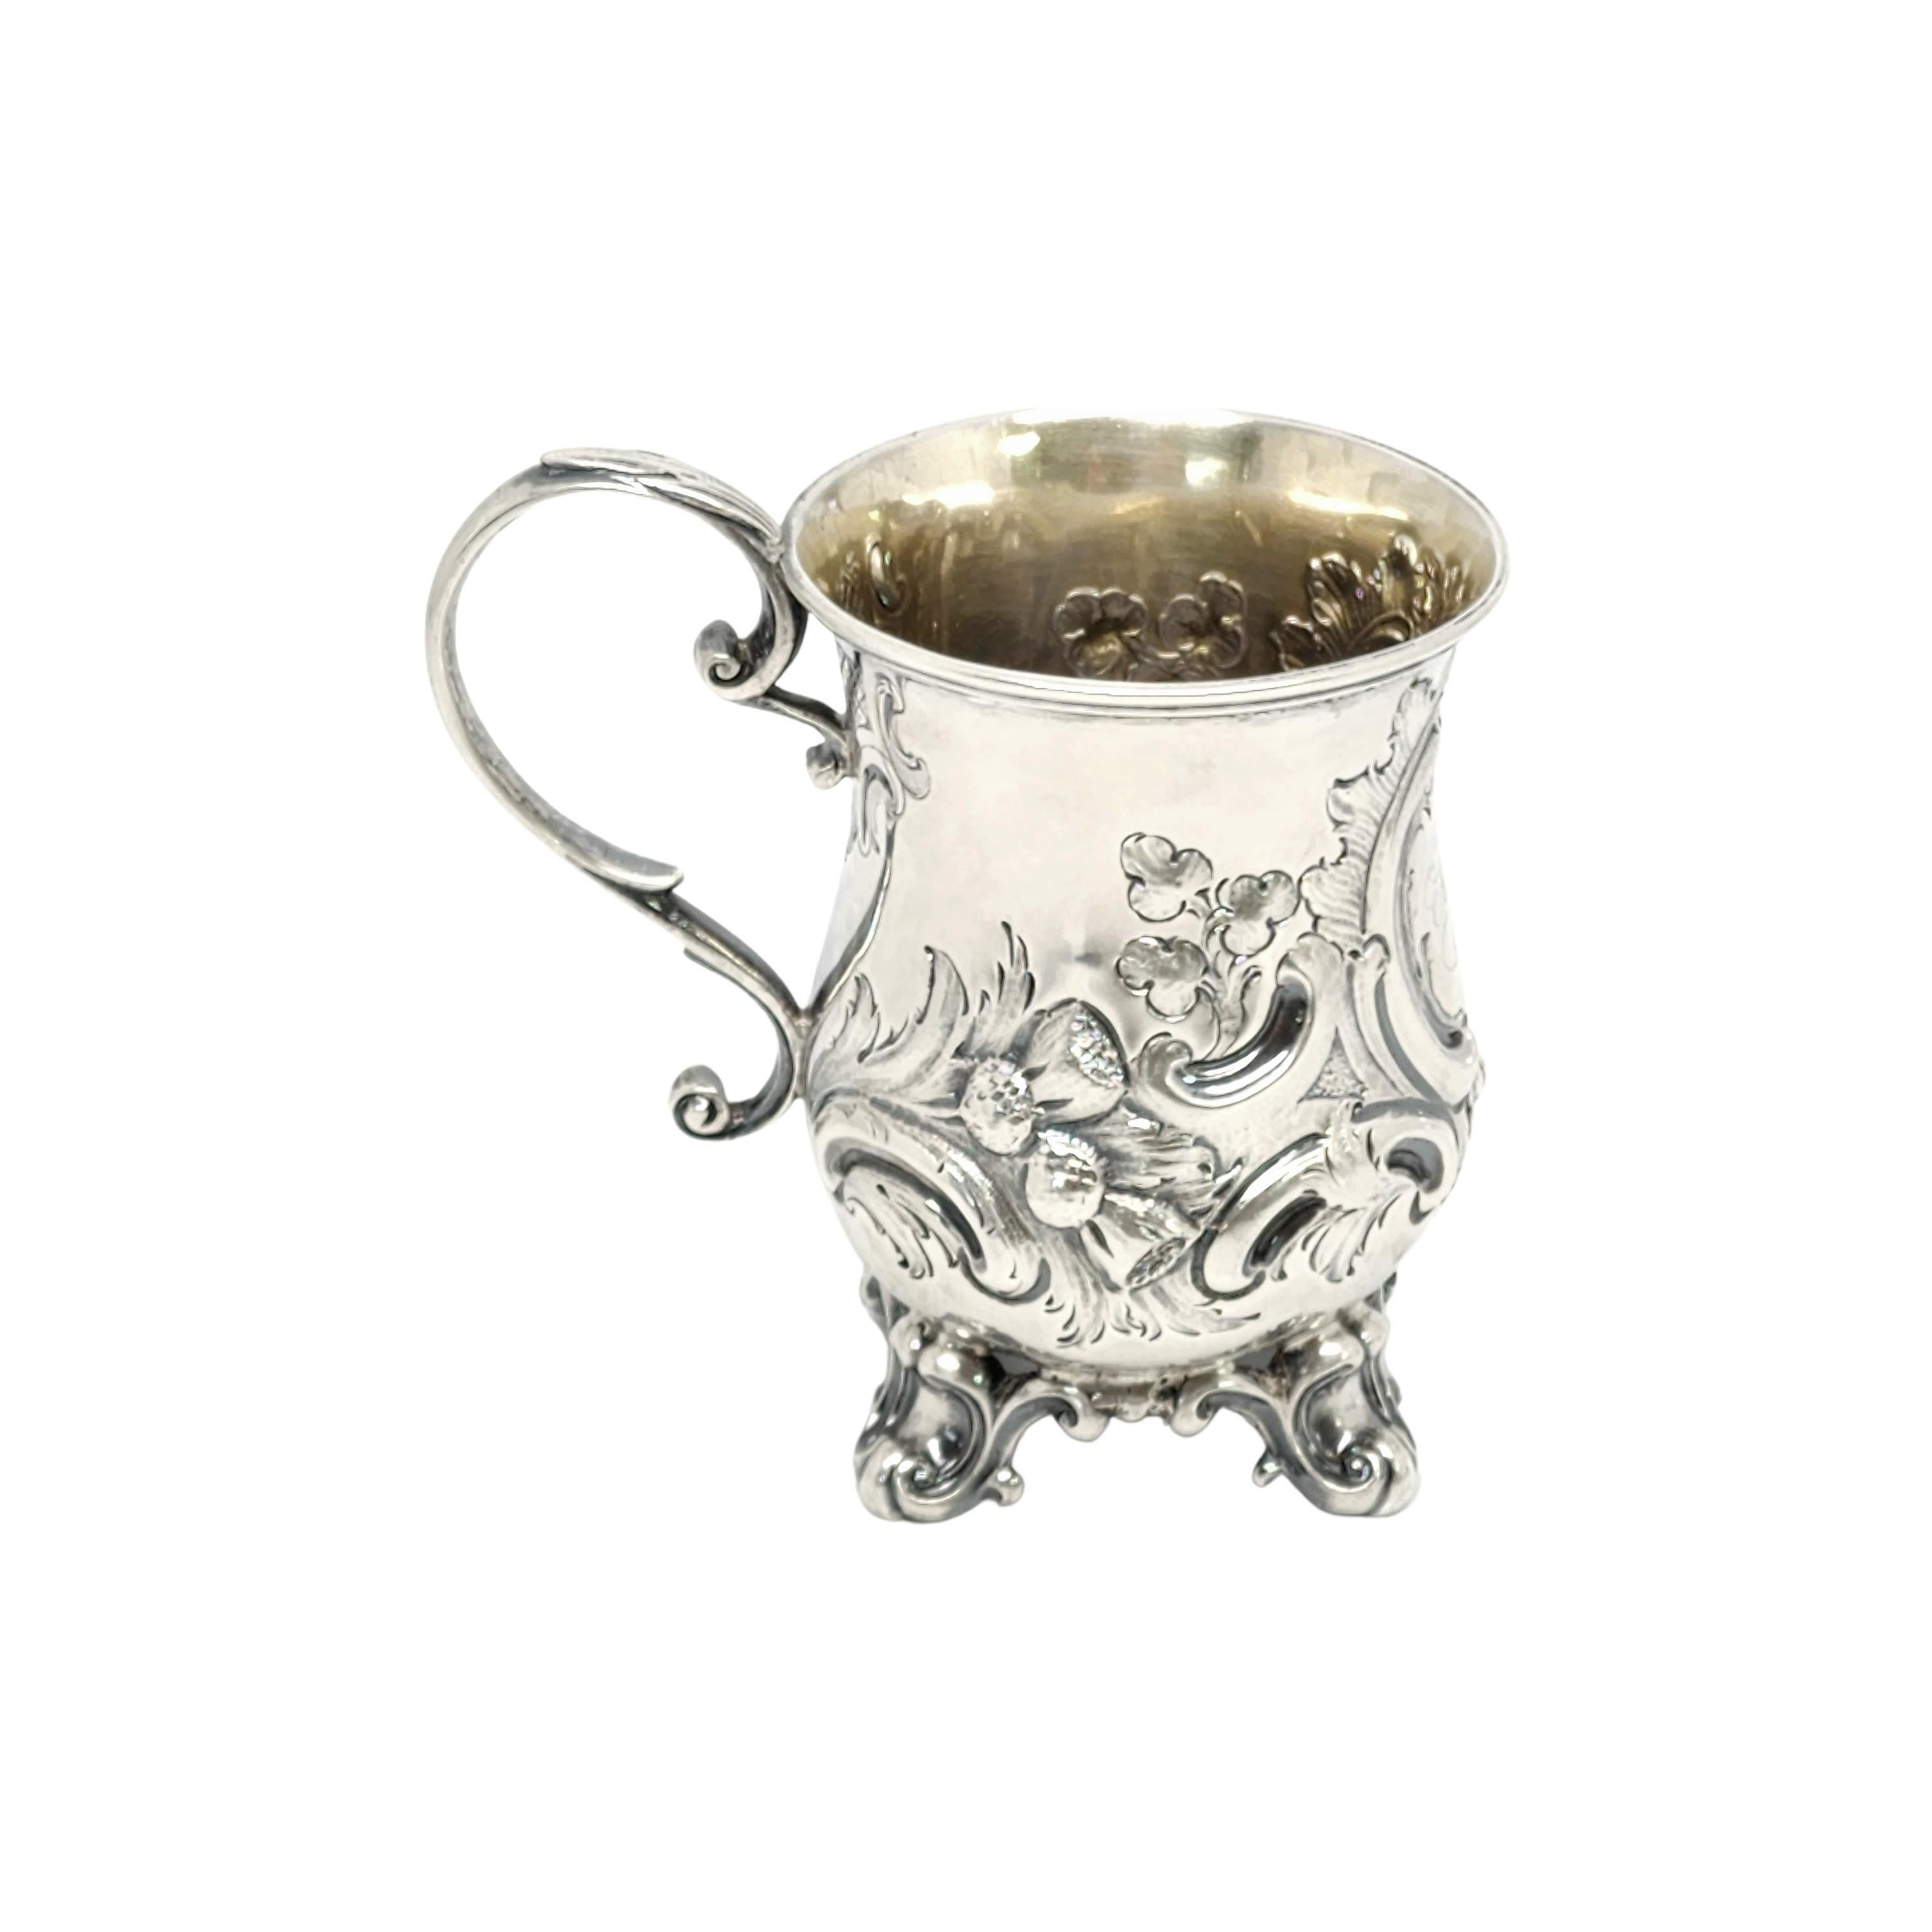 Antique George Angell London England Sterling Silver Footed Cup with Monogram For Sale 3